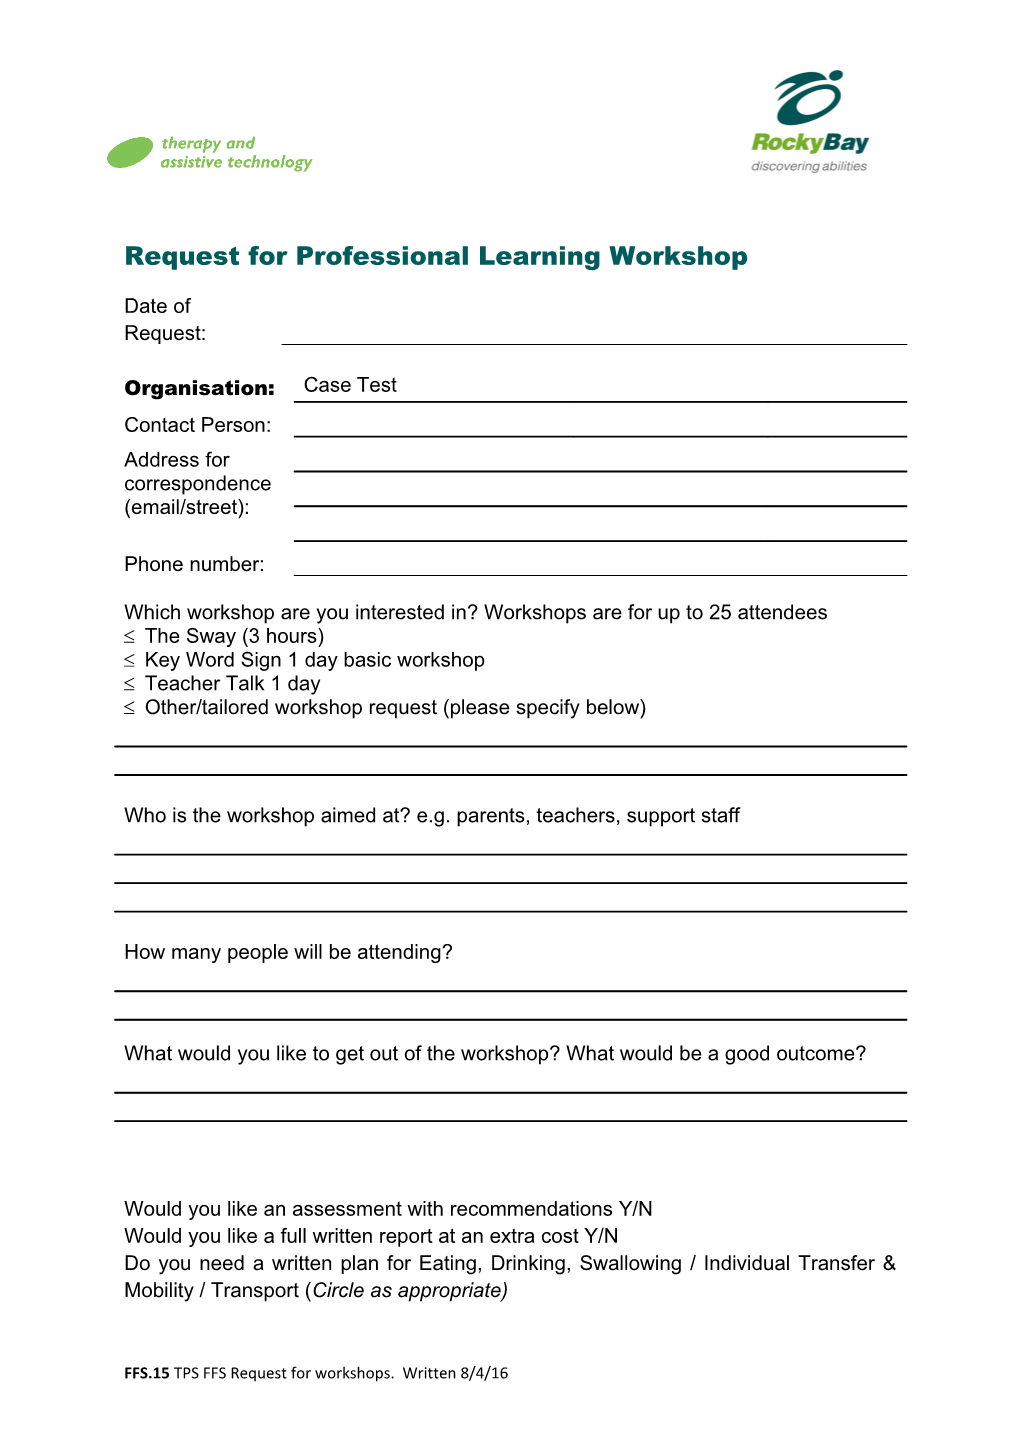 Request for Professional Learning Workshop